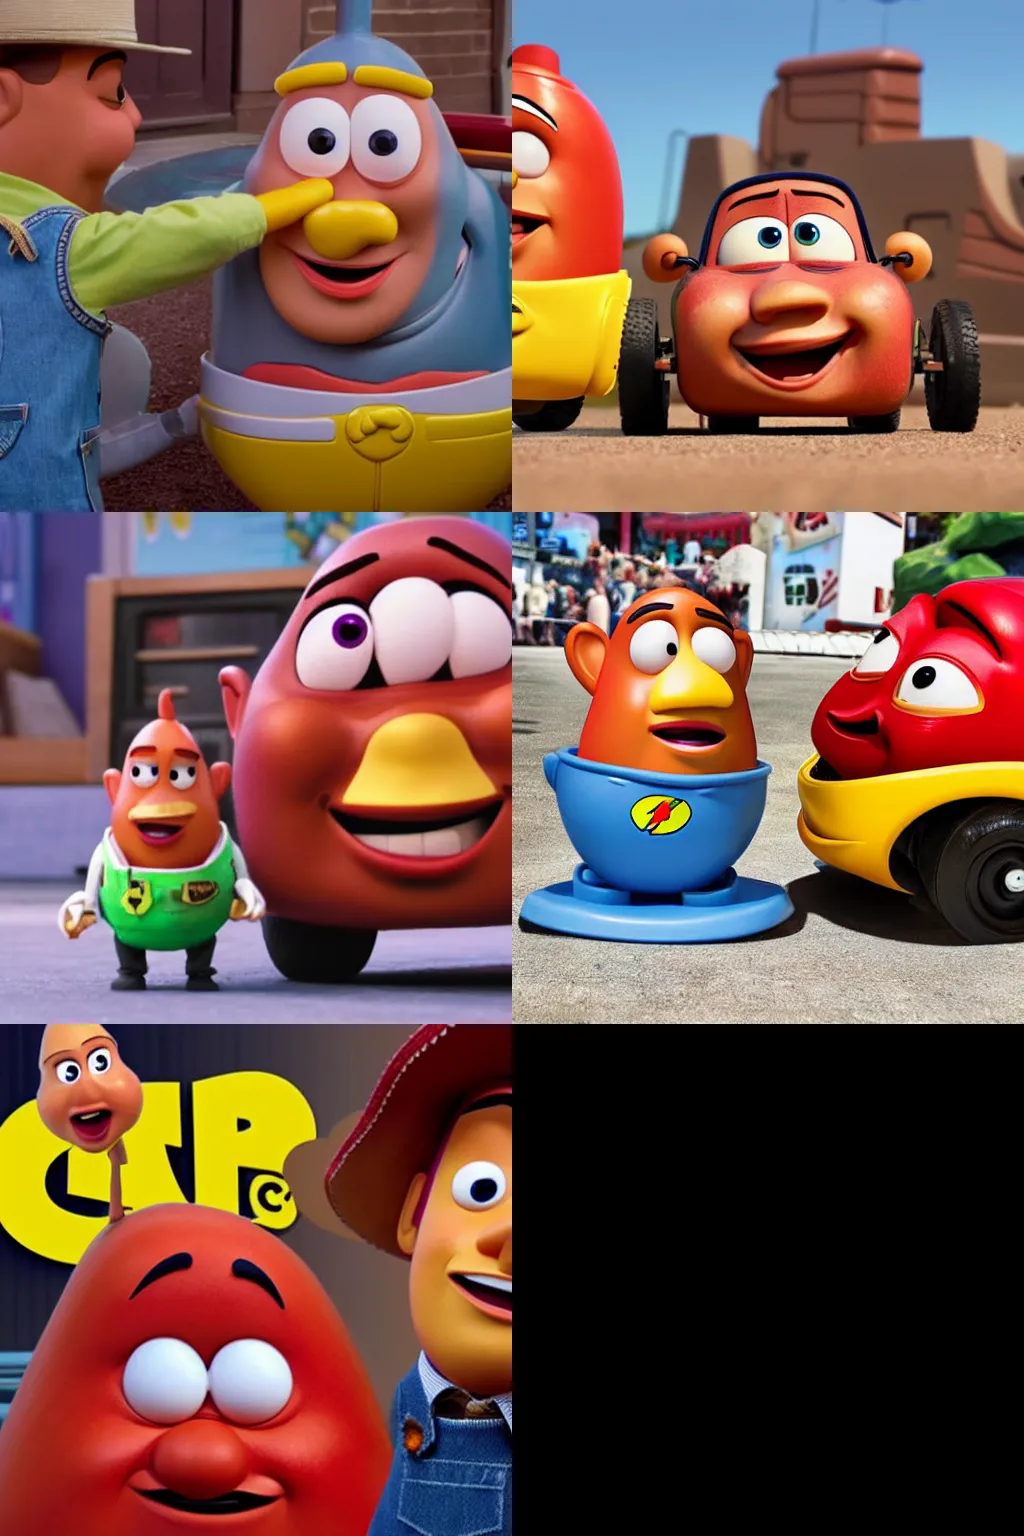 Prompt: mister potato head from the toy story 4 movie in 2019 insulting lightning mcqueen from disney pixar cars movie